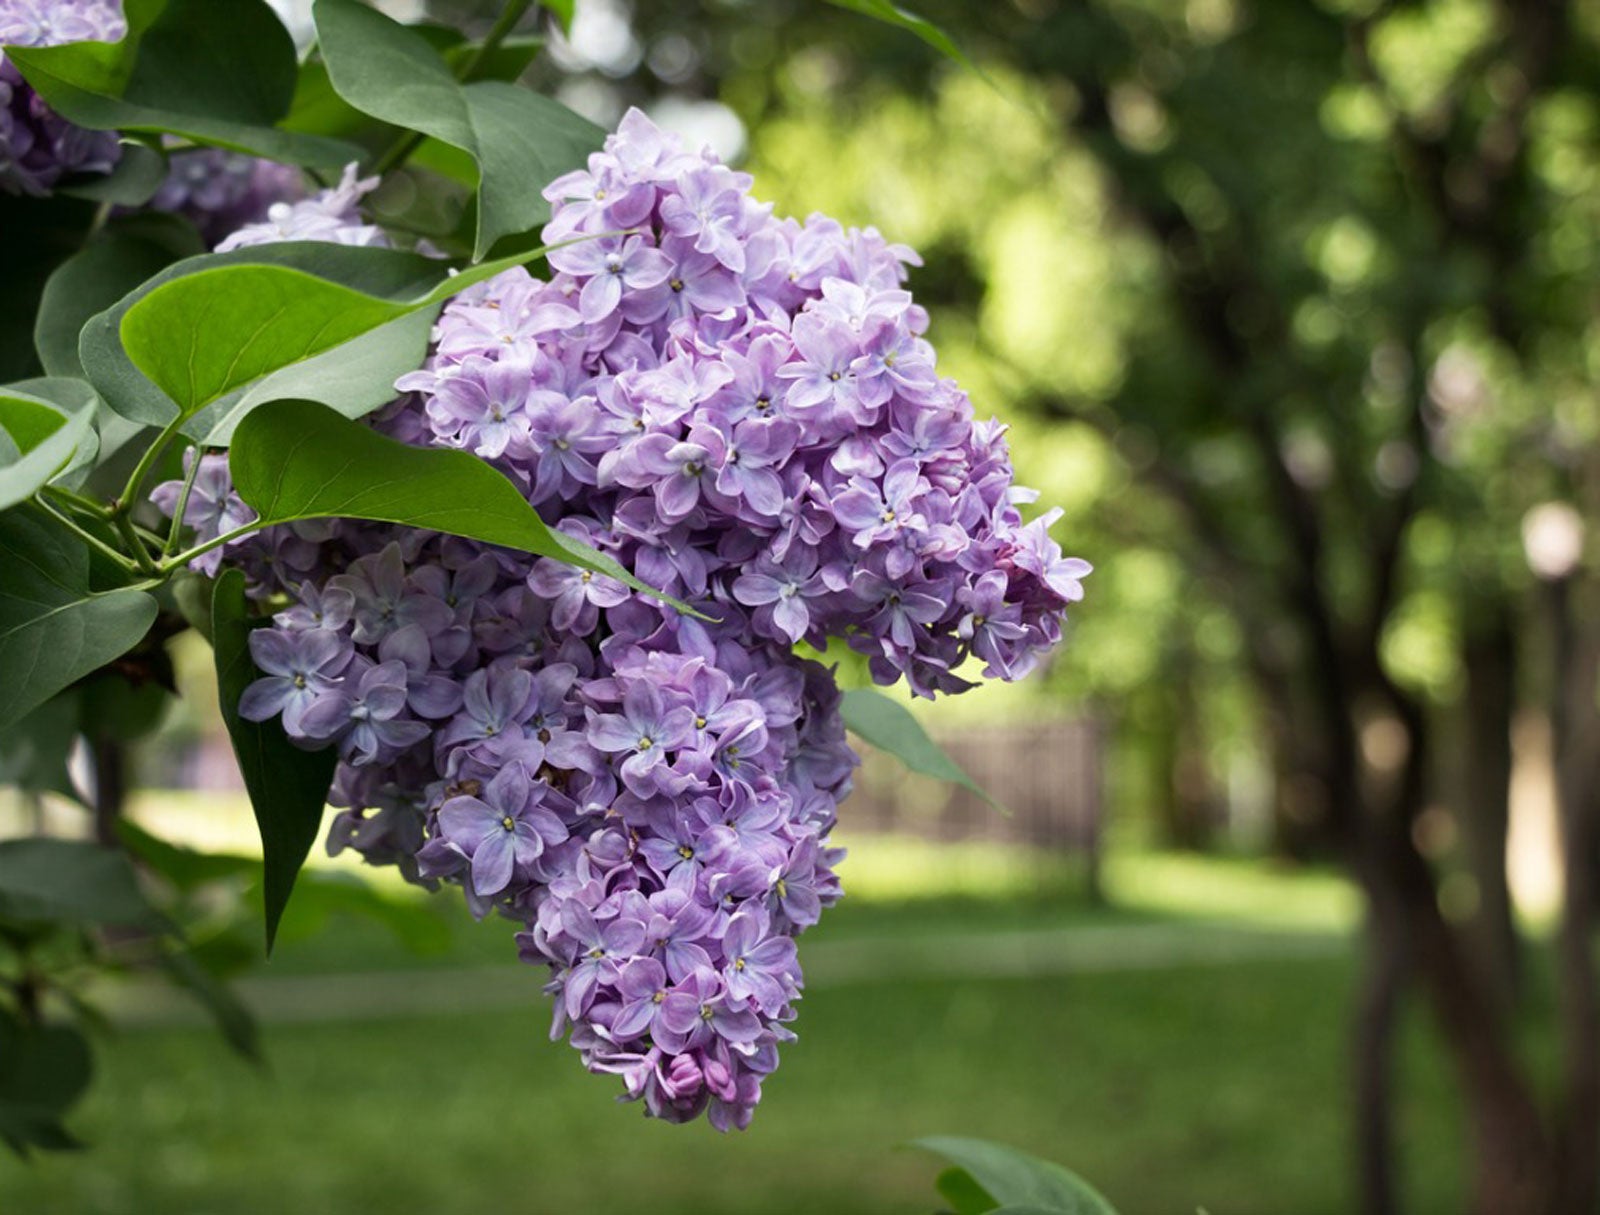 Flowers Lilac Lilac Never Gardening A Not Why Blooming: Know | My Bush Is Reasons How